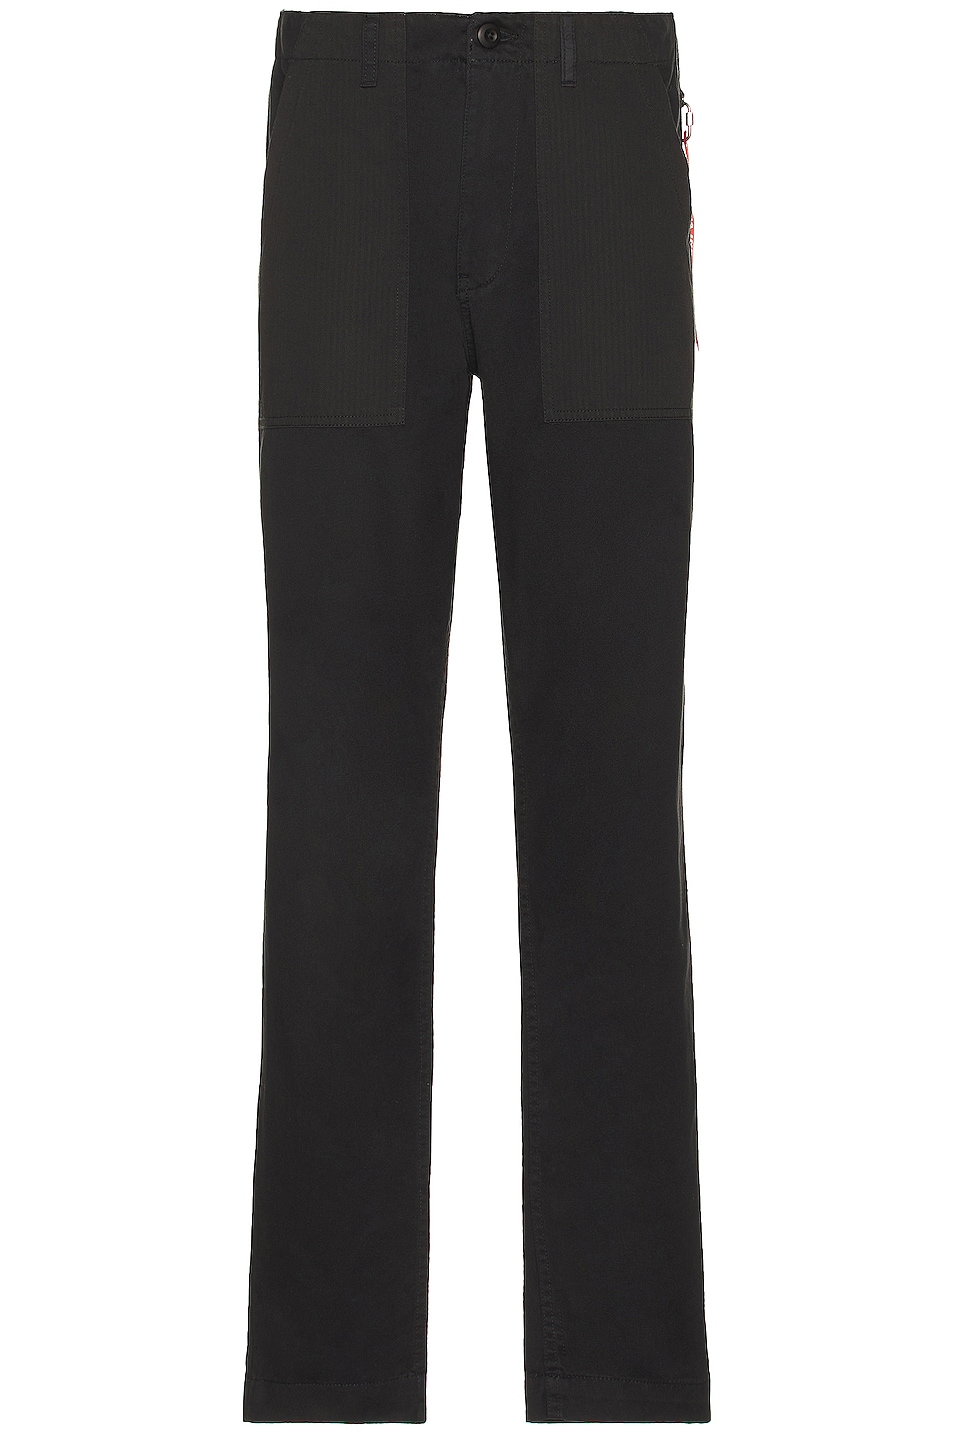 Image 1 of ALPHA INDUSTRIES Fatigue Pant in Black